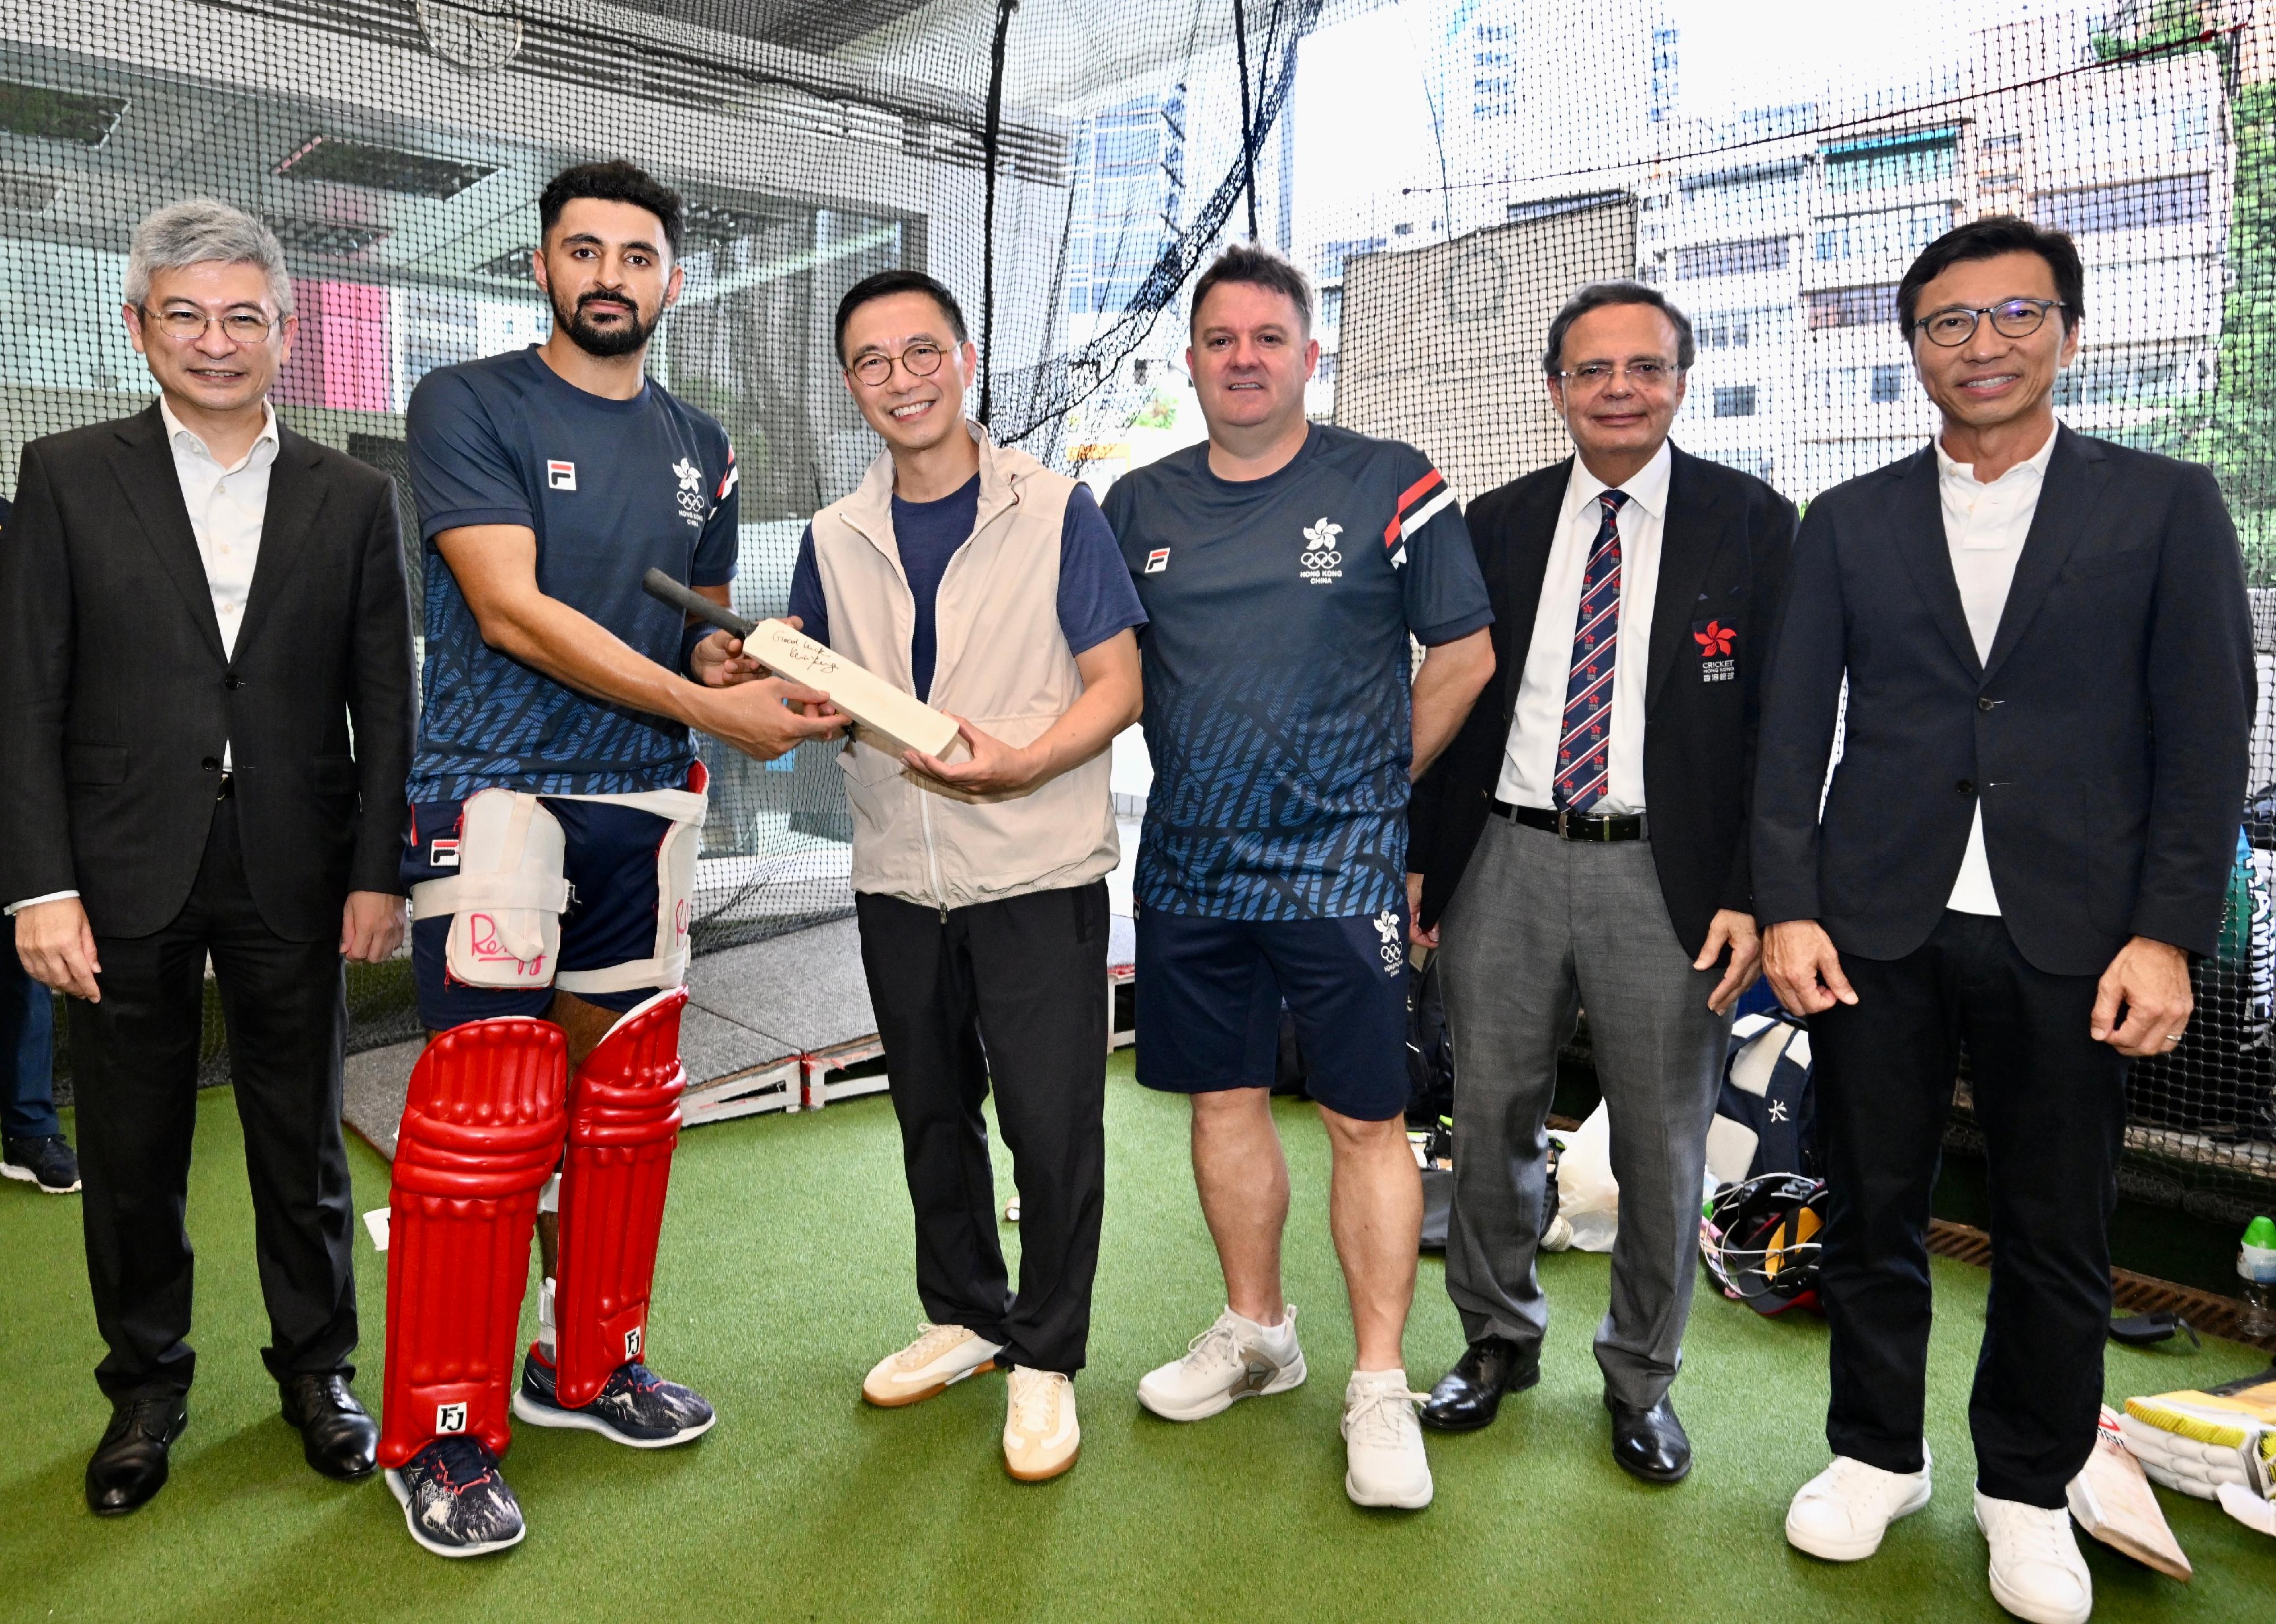 The Secretary for Culture, Sports and Tourism, Mr Kevin Yeung (third left), accompanied by the Under Secretary for Culture, Sports and Tourism, Mr Raistlin Lau (first left), and the Commissioner for Sports, Mr Sam Wong (first right), yesterday (September 13) afternoon visited the Craigengower Cricket Club to show support to cricket athletes while they were preparing for the Asian Games in Hangzhou. Mr Yeung also autographed on a cricket bat for athletes.